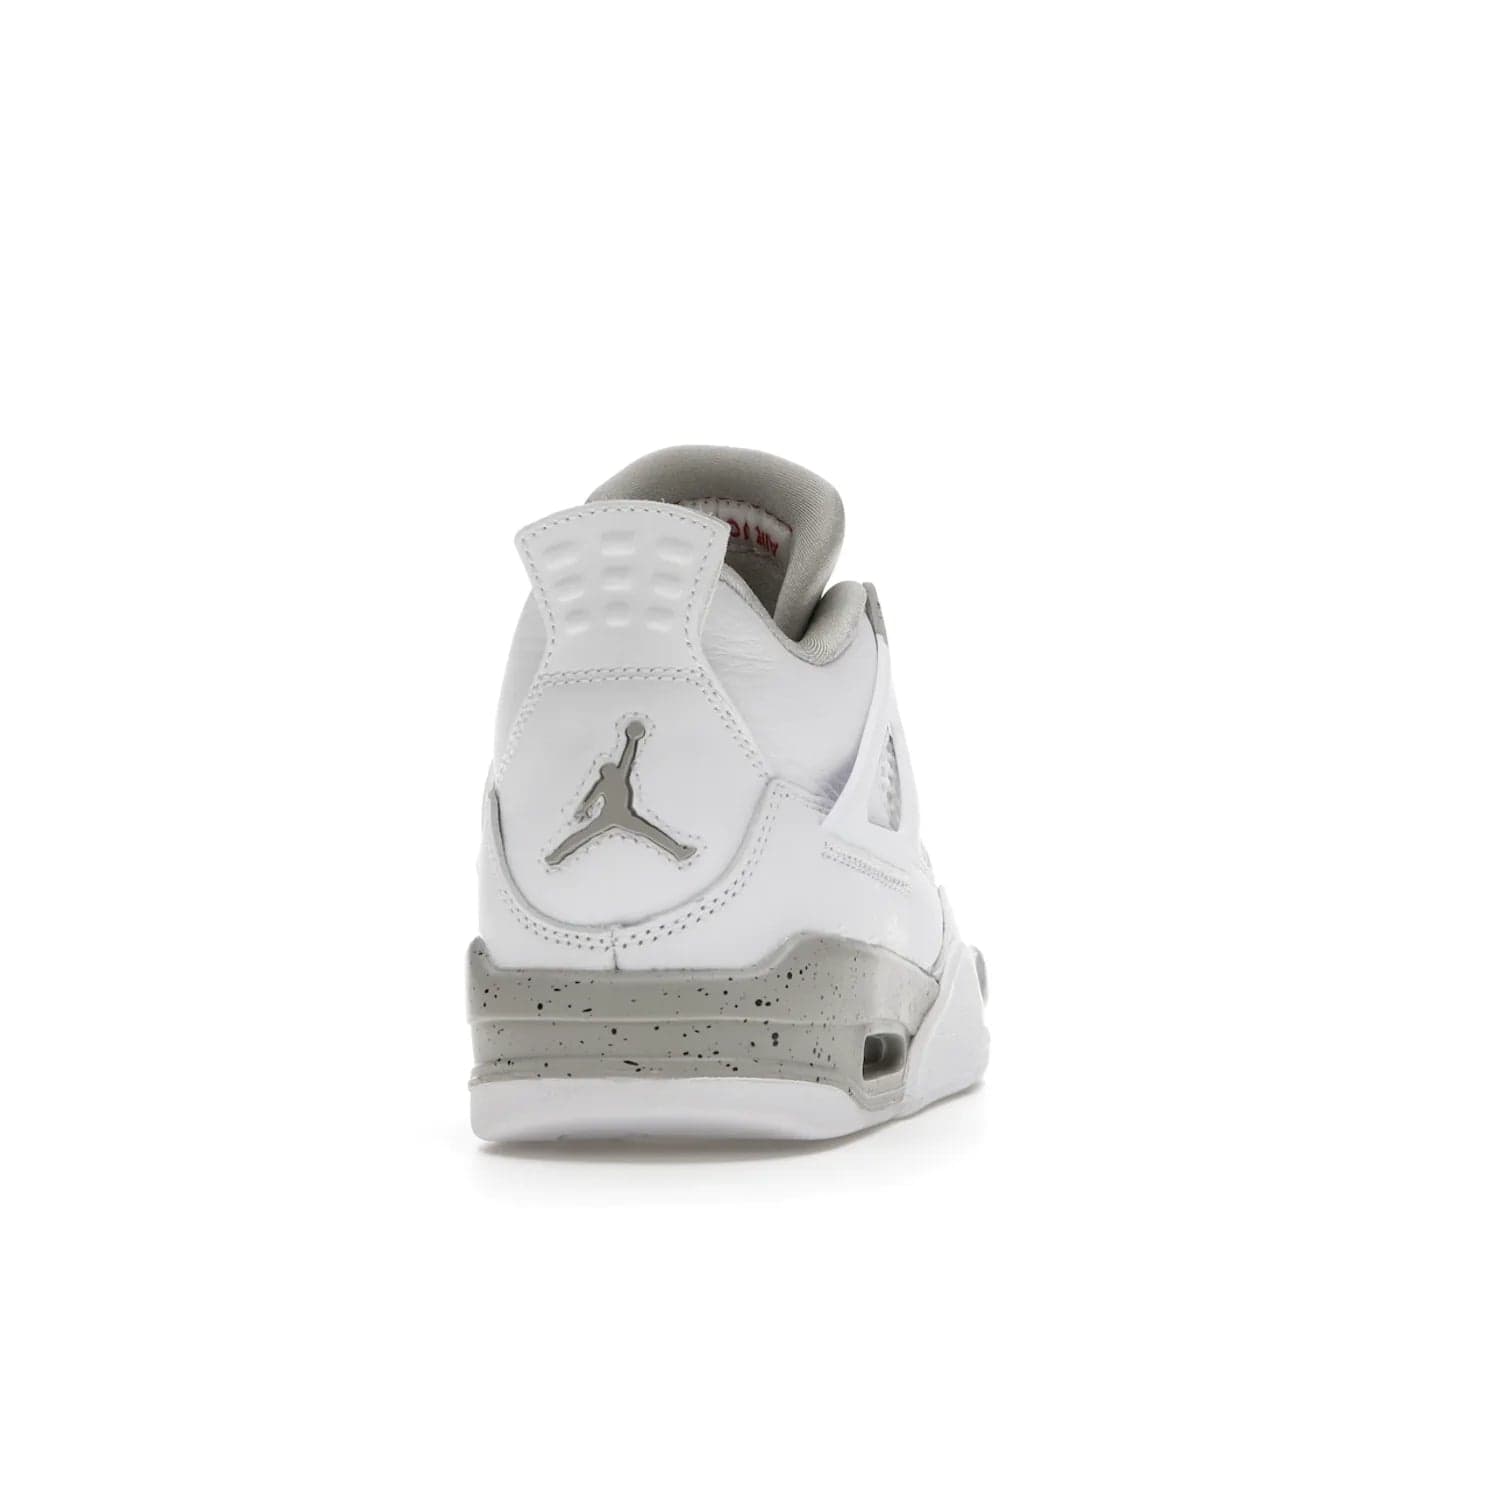 Jordan 4 Retro White Oreo (2021) (GS) - Image 29 - Only at www.BallersClubKickz.com - White Oreo Air Jordan 4 Retro 2021 GS - Iconic sneaker silhouette with white canvas upper, Tech Grey detailing, and Fire Red accents. Available July 2021.